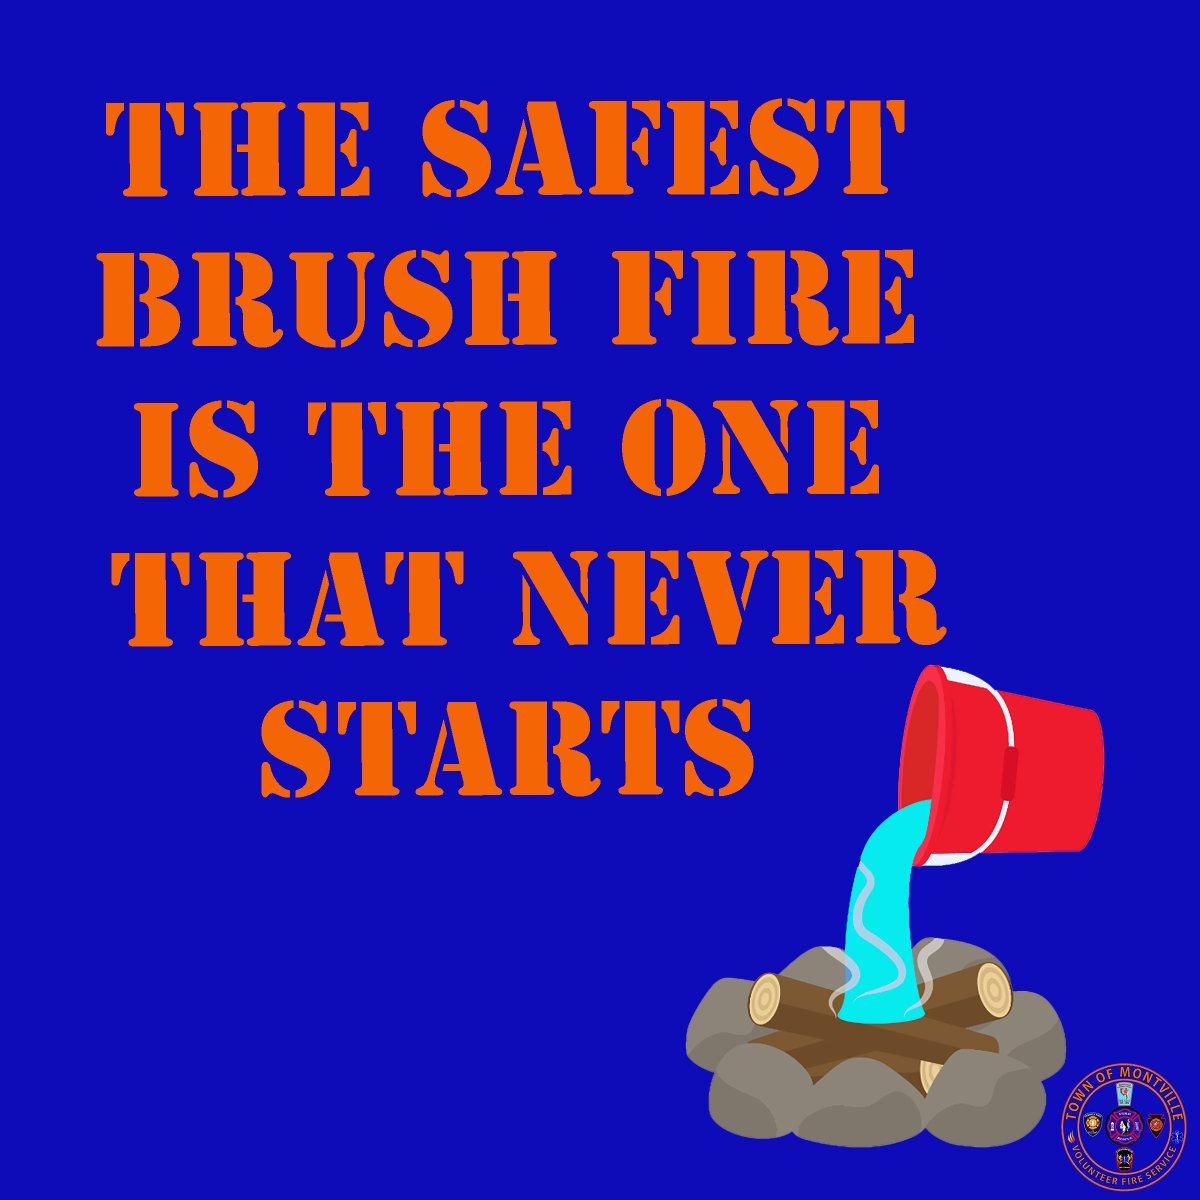 The Safest Brush Fire Is The One That Never Starts

#MTVCT #Montville #MontvilleCT #CT #Connecticut #FireSafety #WX #WXCT #CTWX @CTDEEPNews